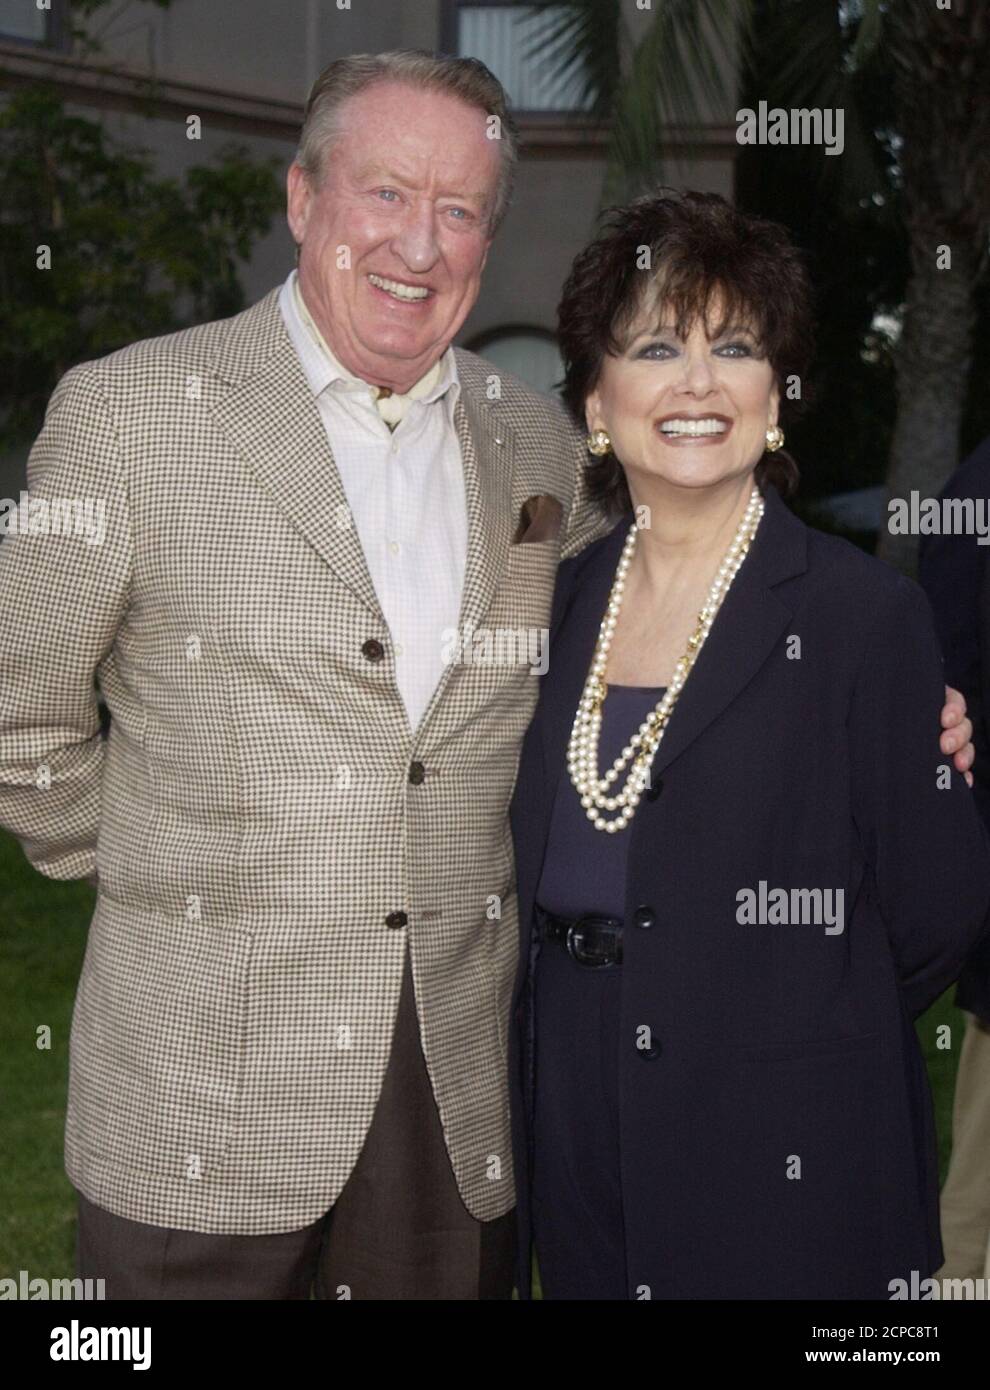 Actress Suzanne Pleshette, who stars in the television series "Good Morning  Miami", poses as she arrives with her husband Tom Poston at the NBC  All-Star Party held for the nation's TV critics